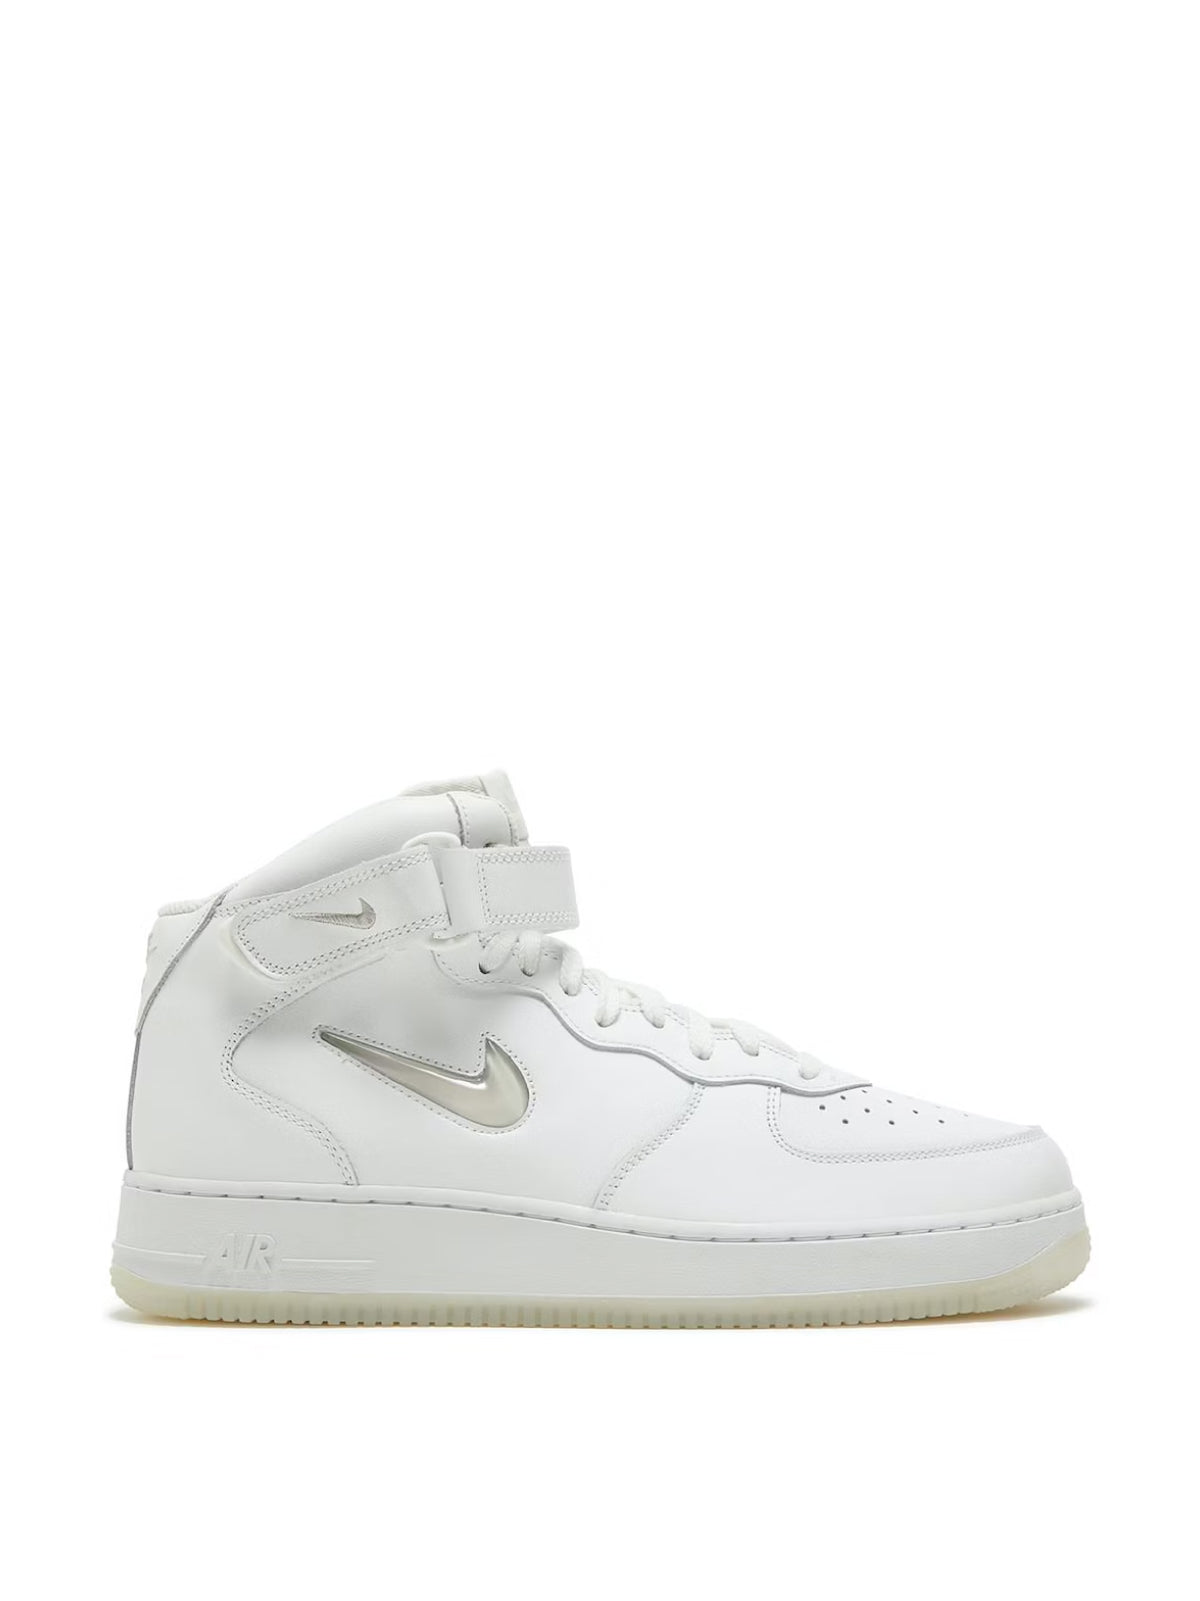 Nike-OUTLET-SALE-Air Force 1 Mid '07 Sneakers-ARCHIVIST